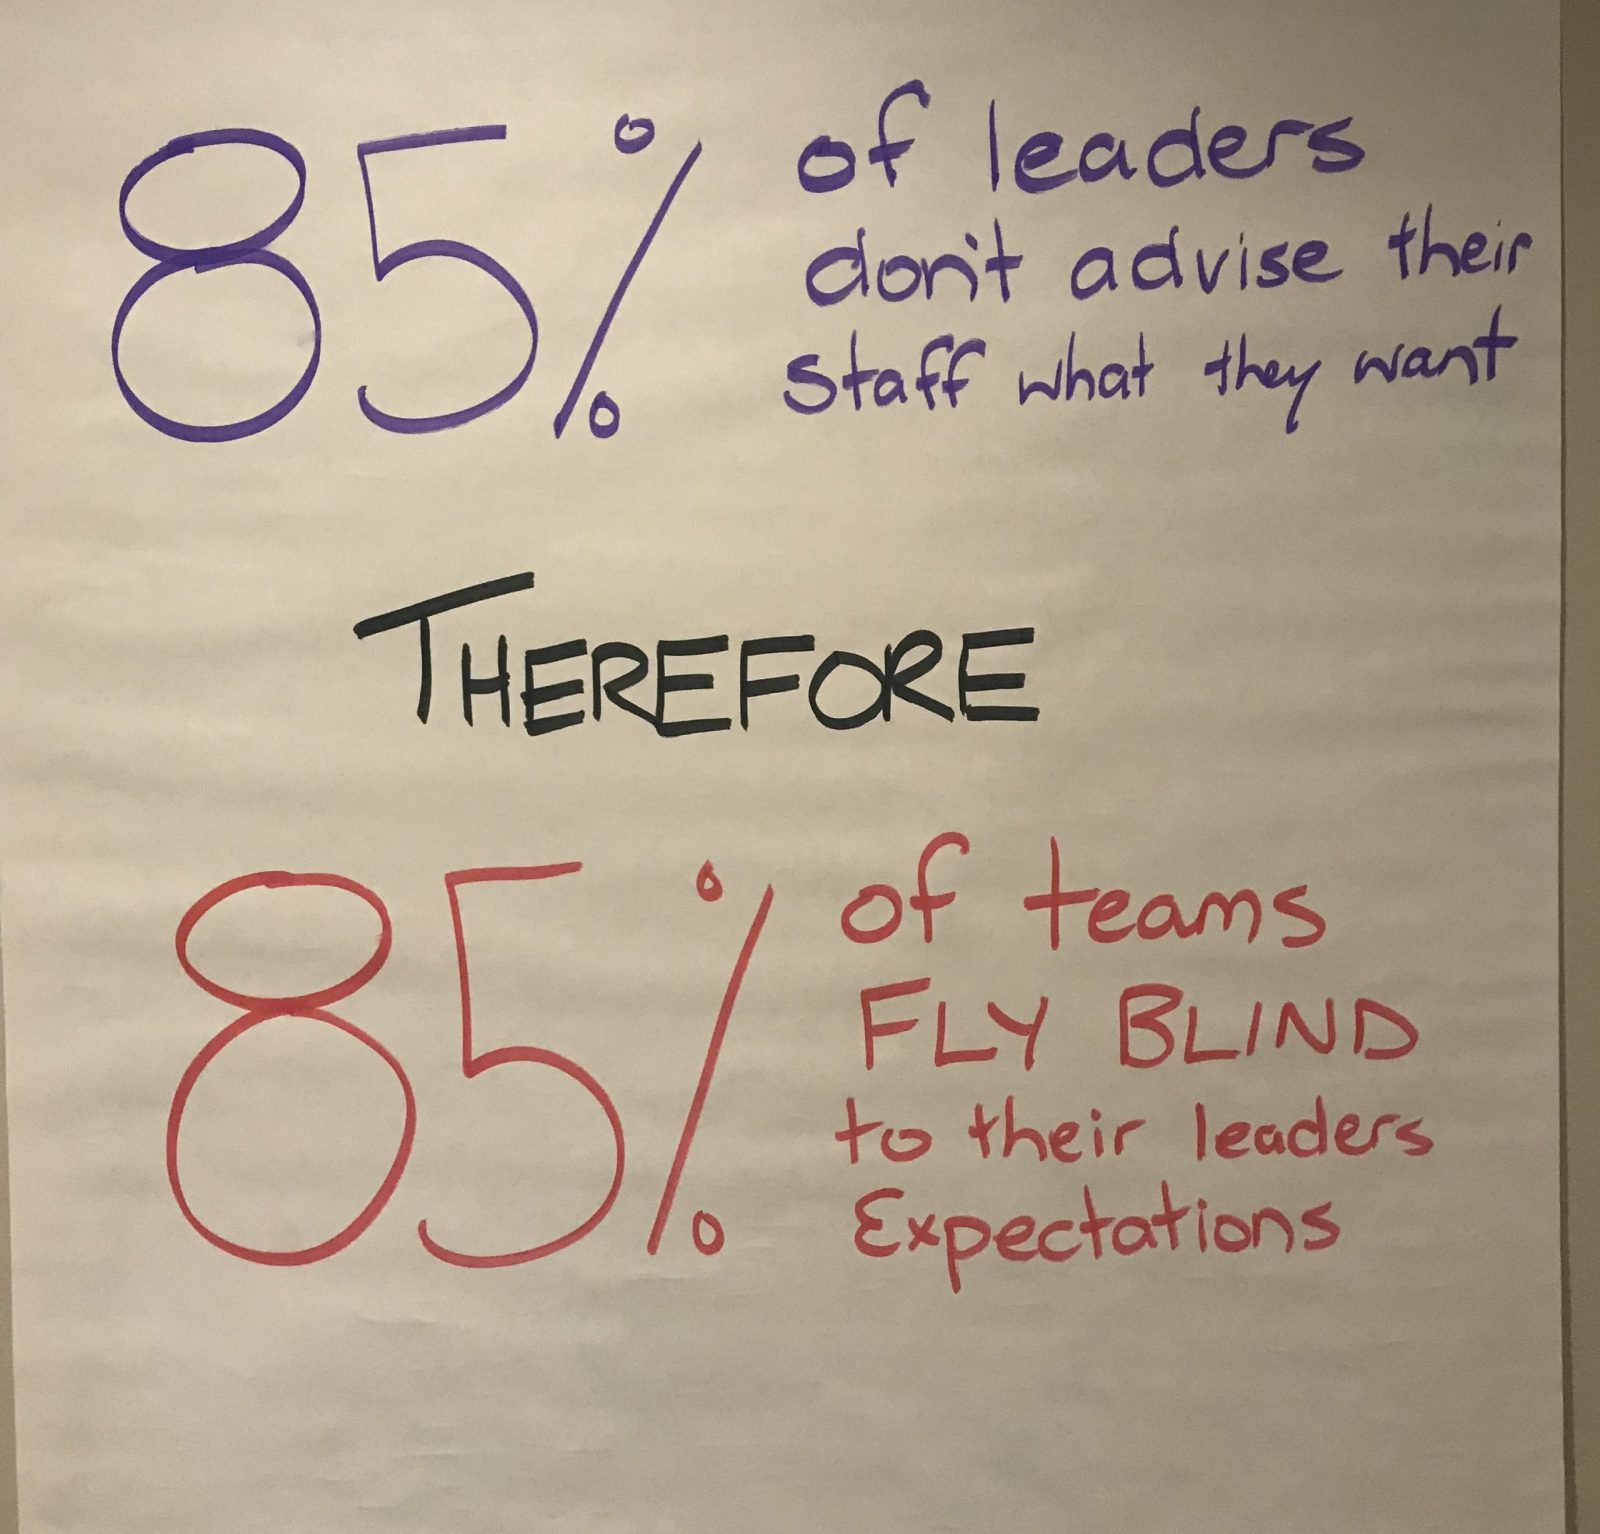 Leadership Insights: Are You Flying Blind to Expectations?